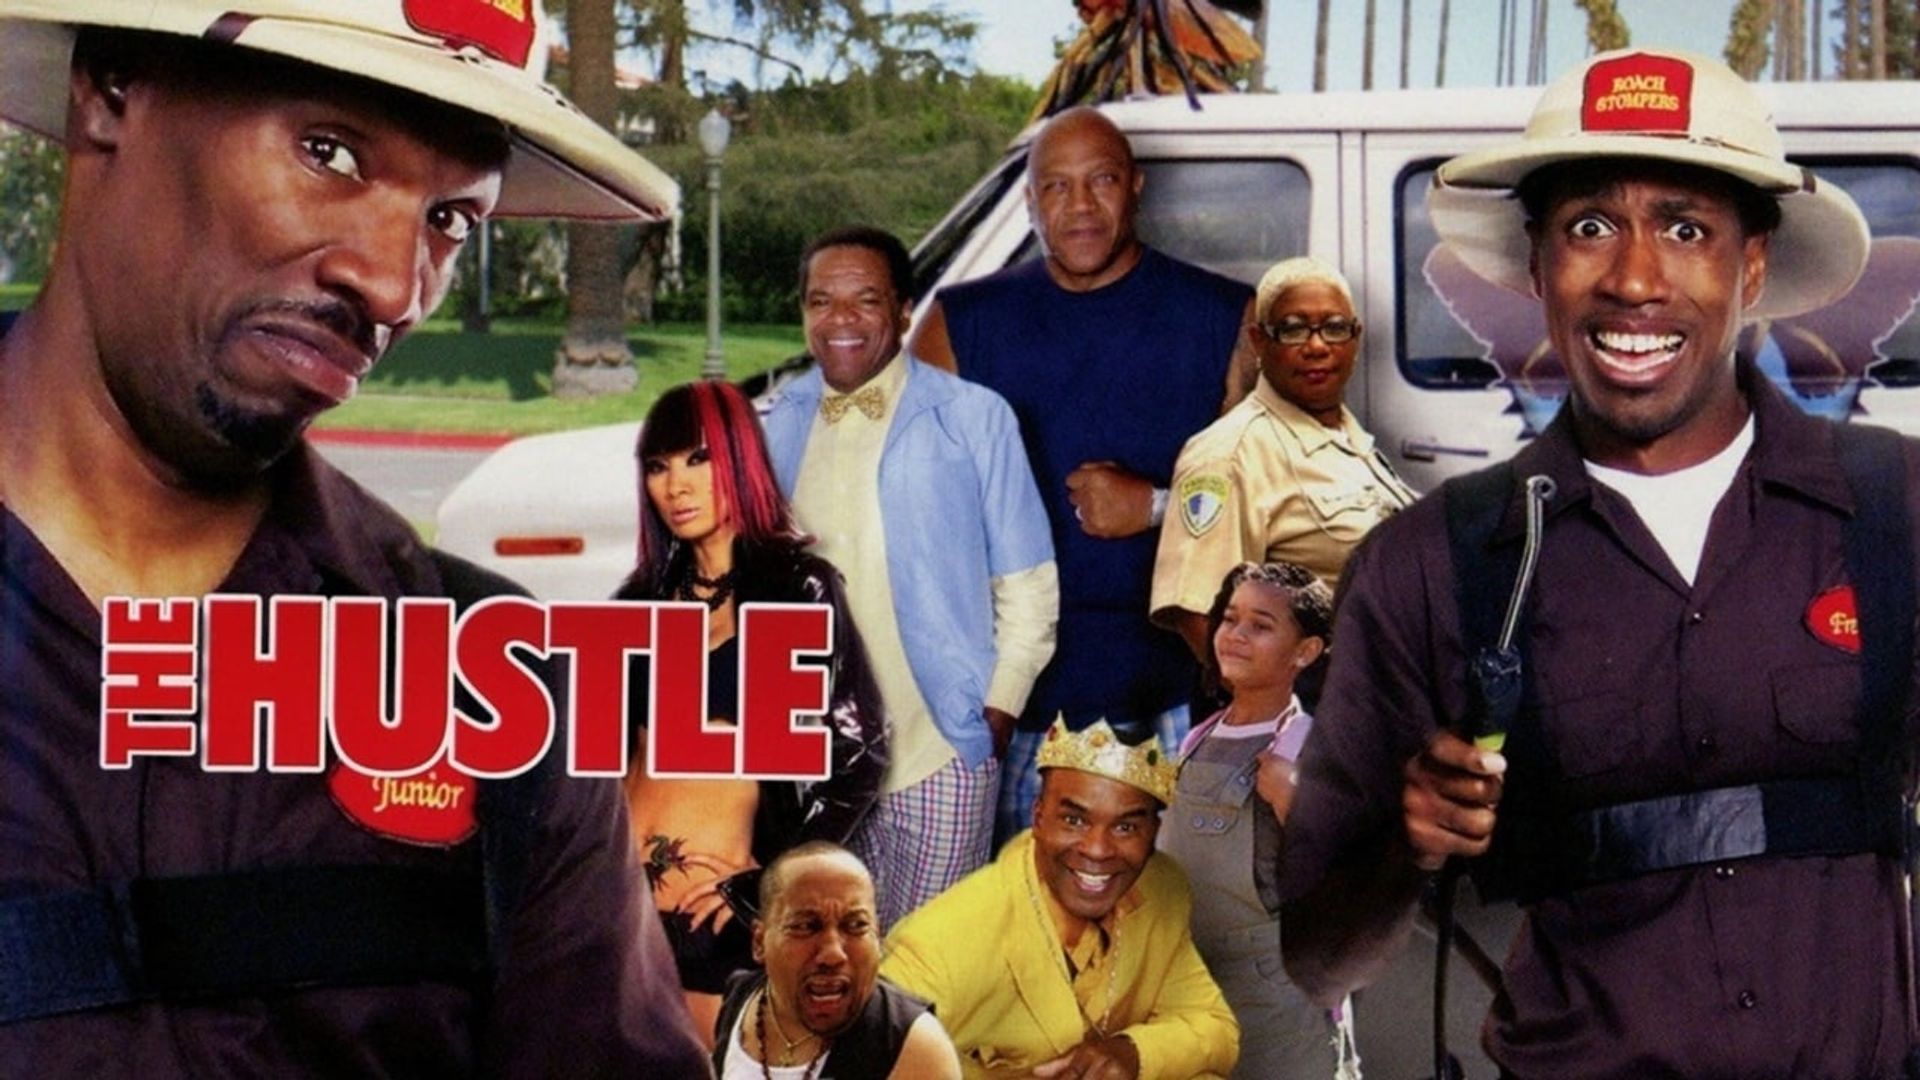 The Hustle background